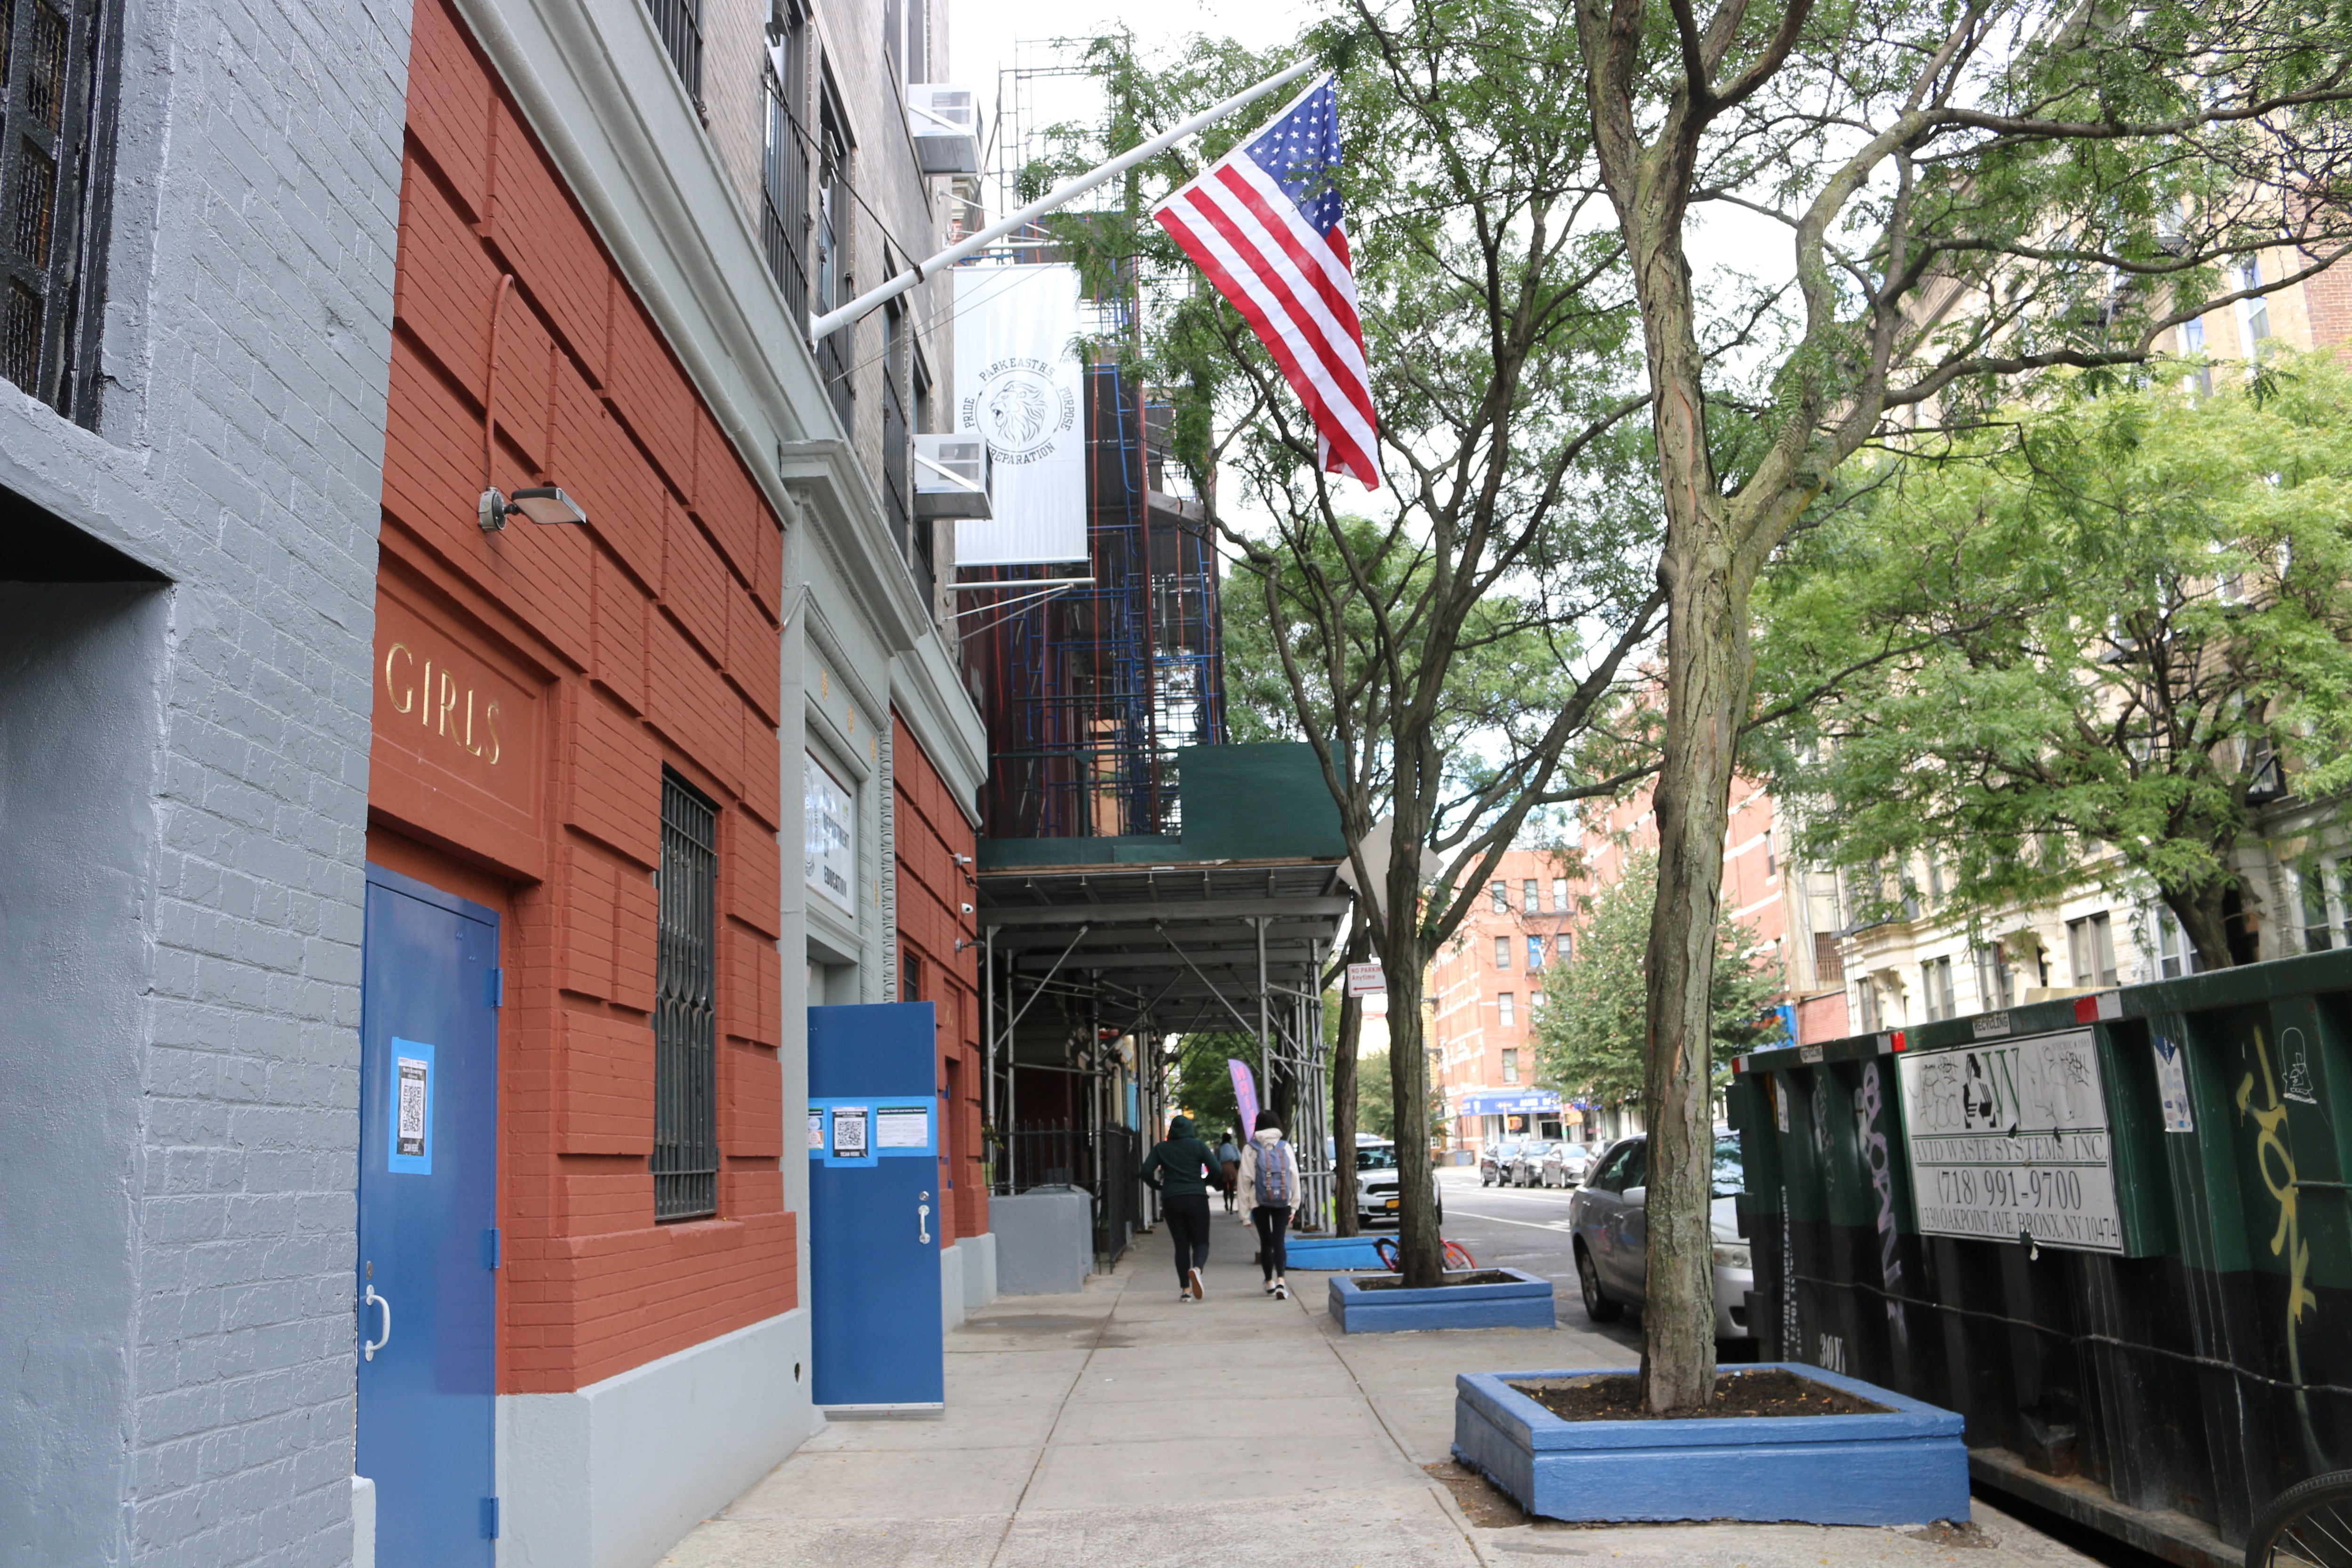 An American flag hangs above the entrance of a red brick building with blue doors.